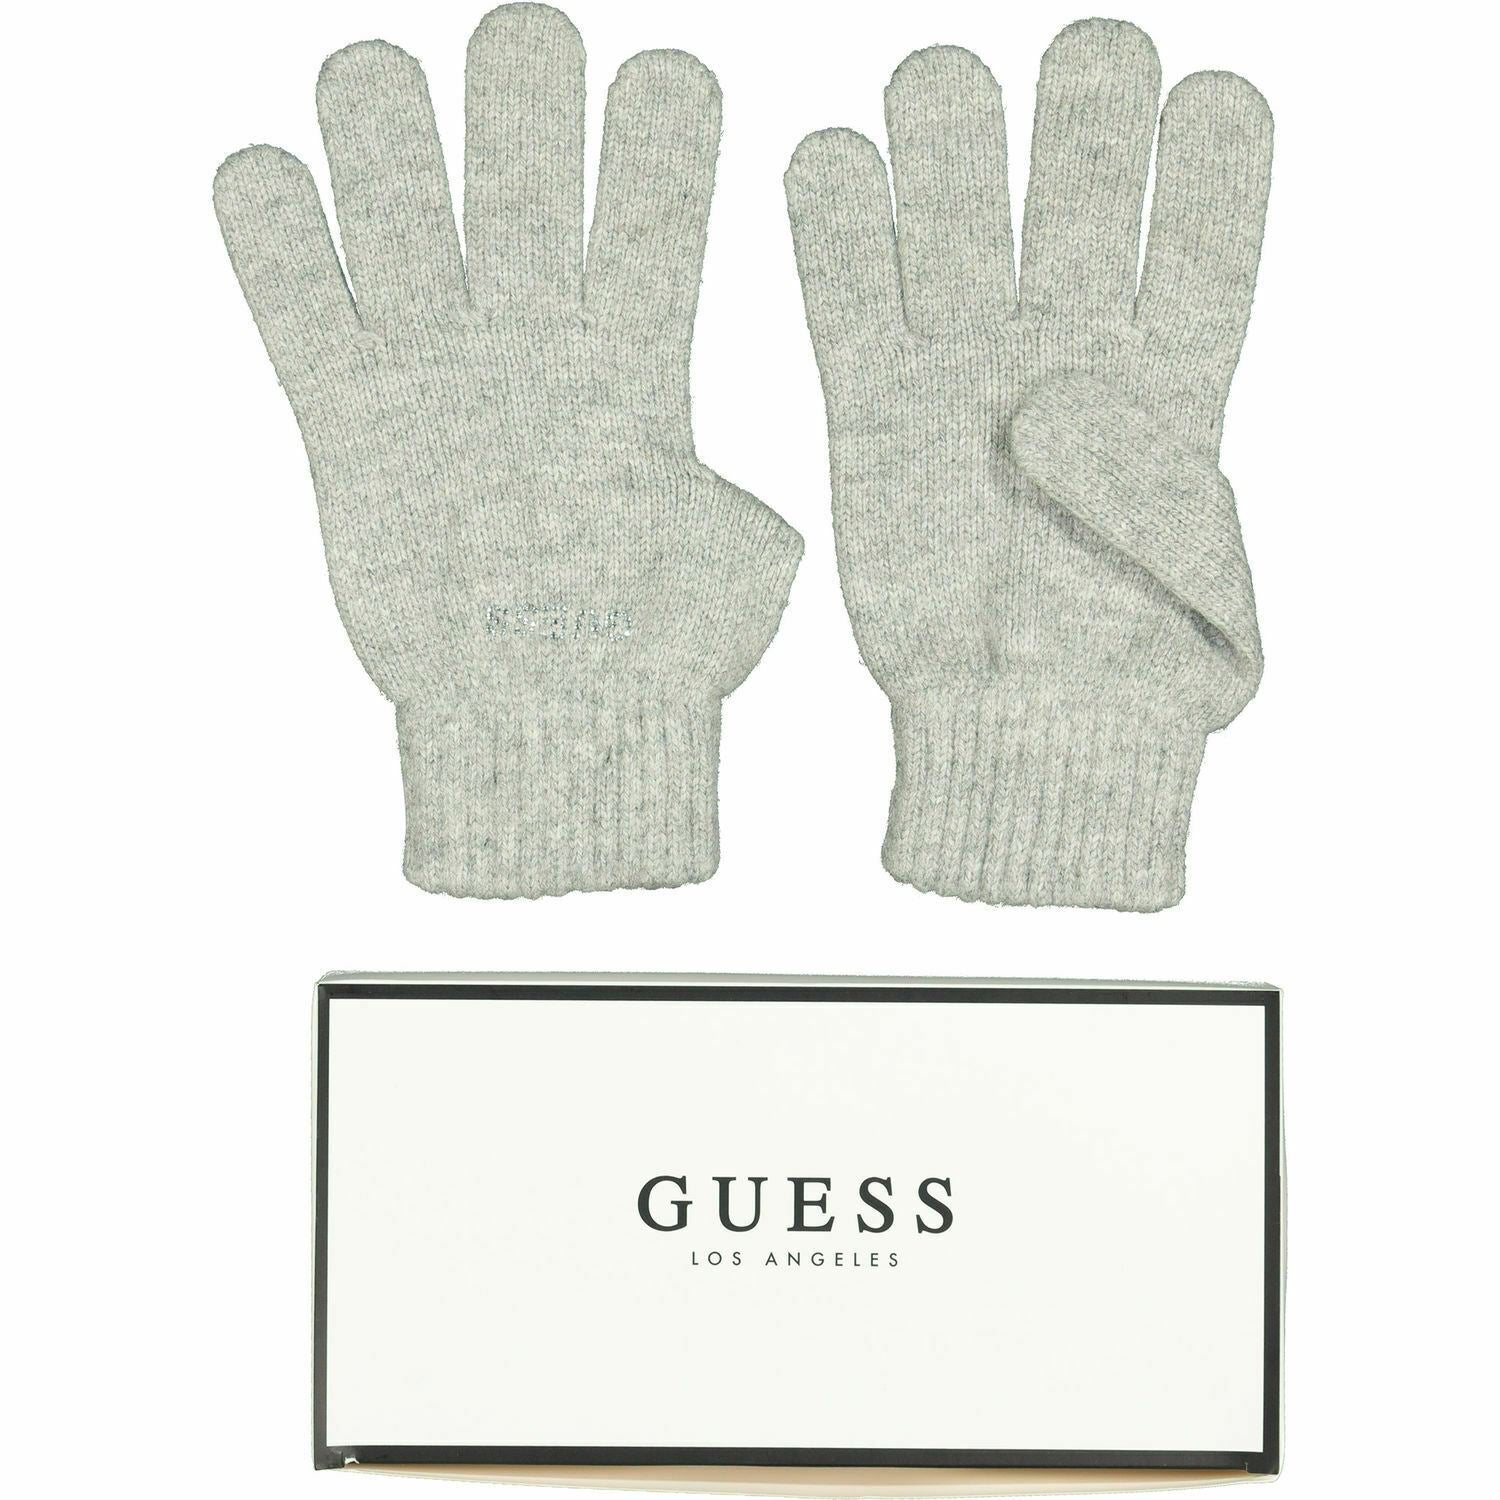 GUESS Women's Cashmere Blend Knitted Gloves, Grey, Boxed, size M /size L